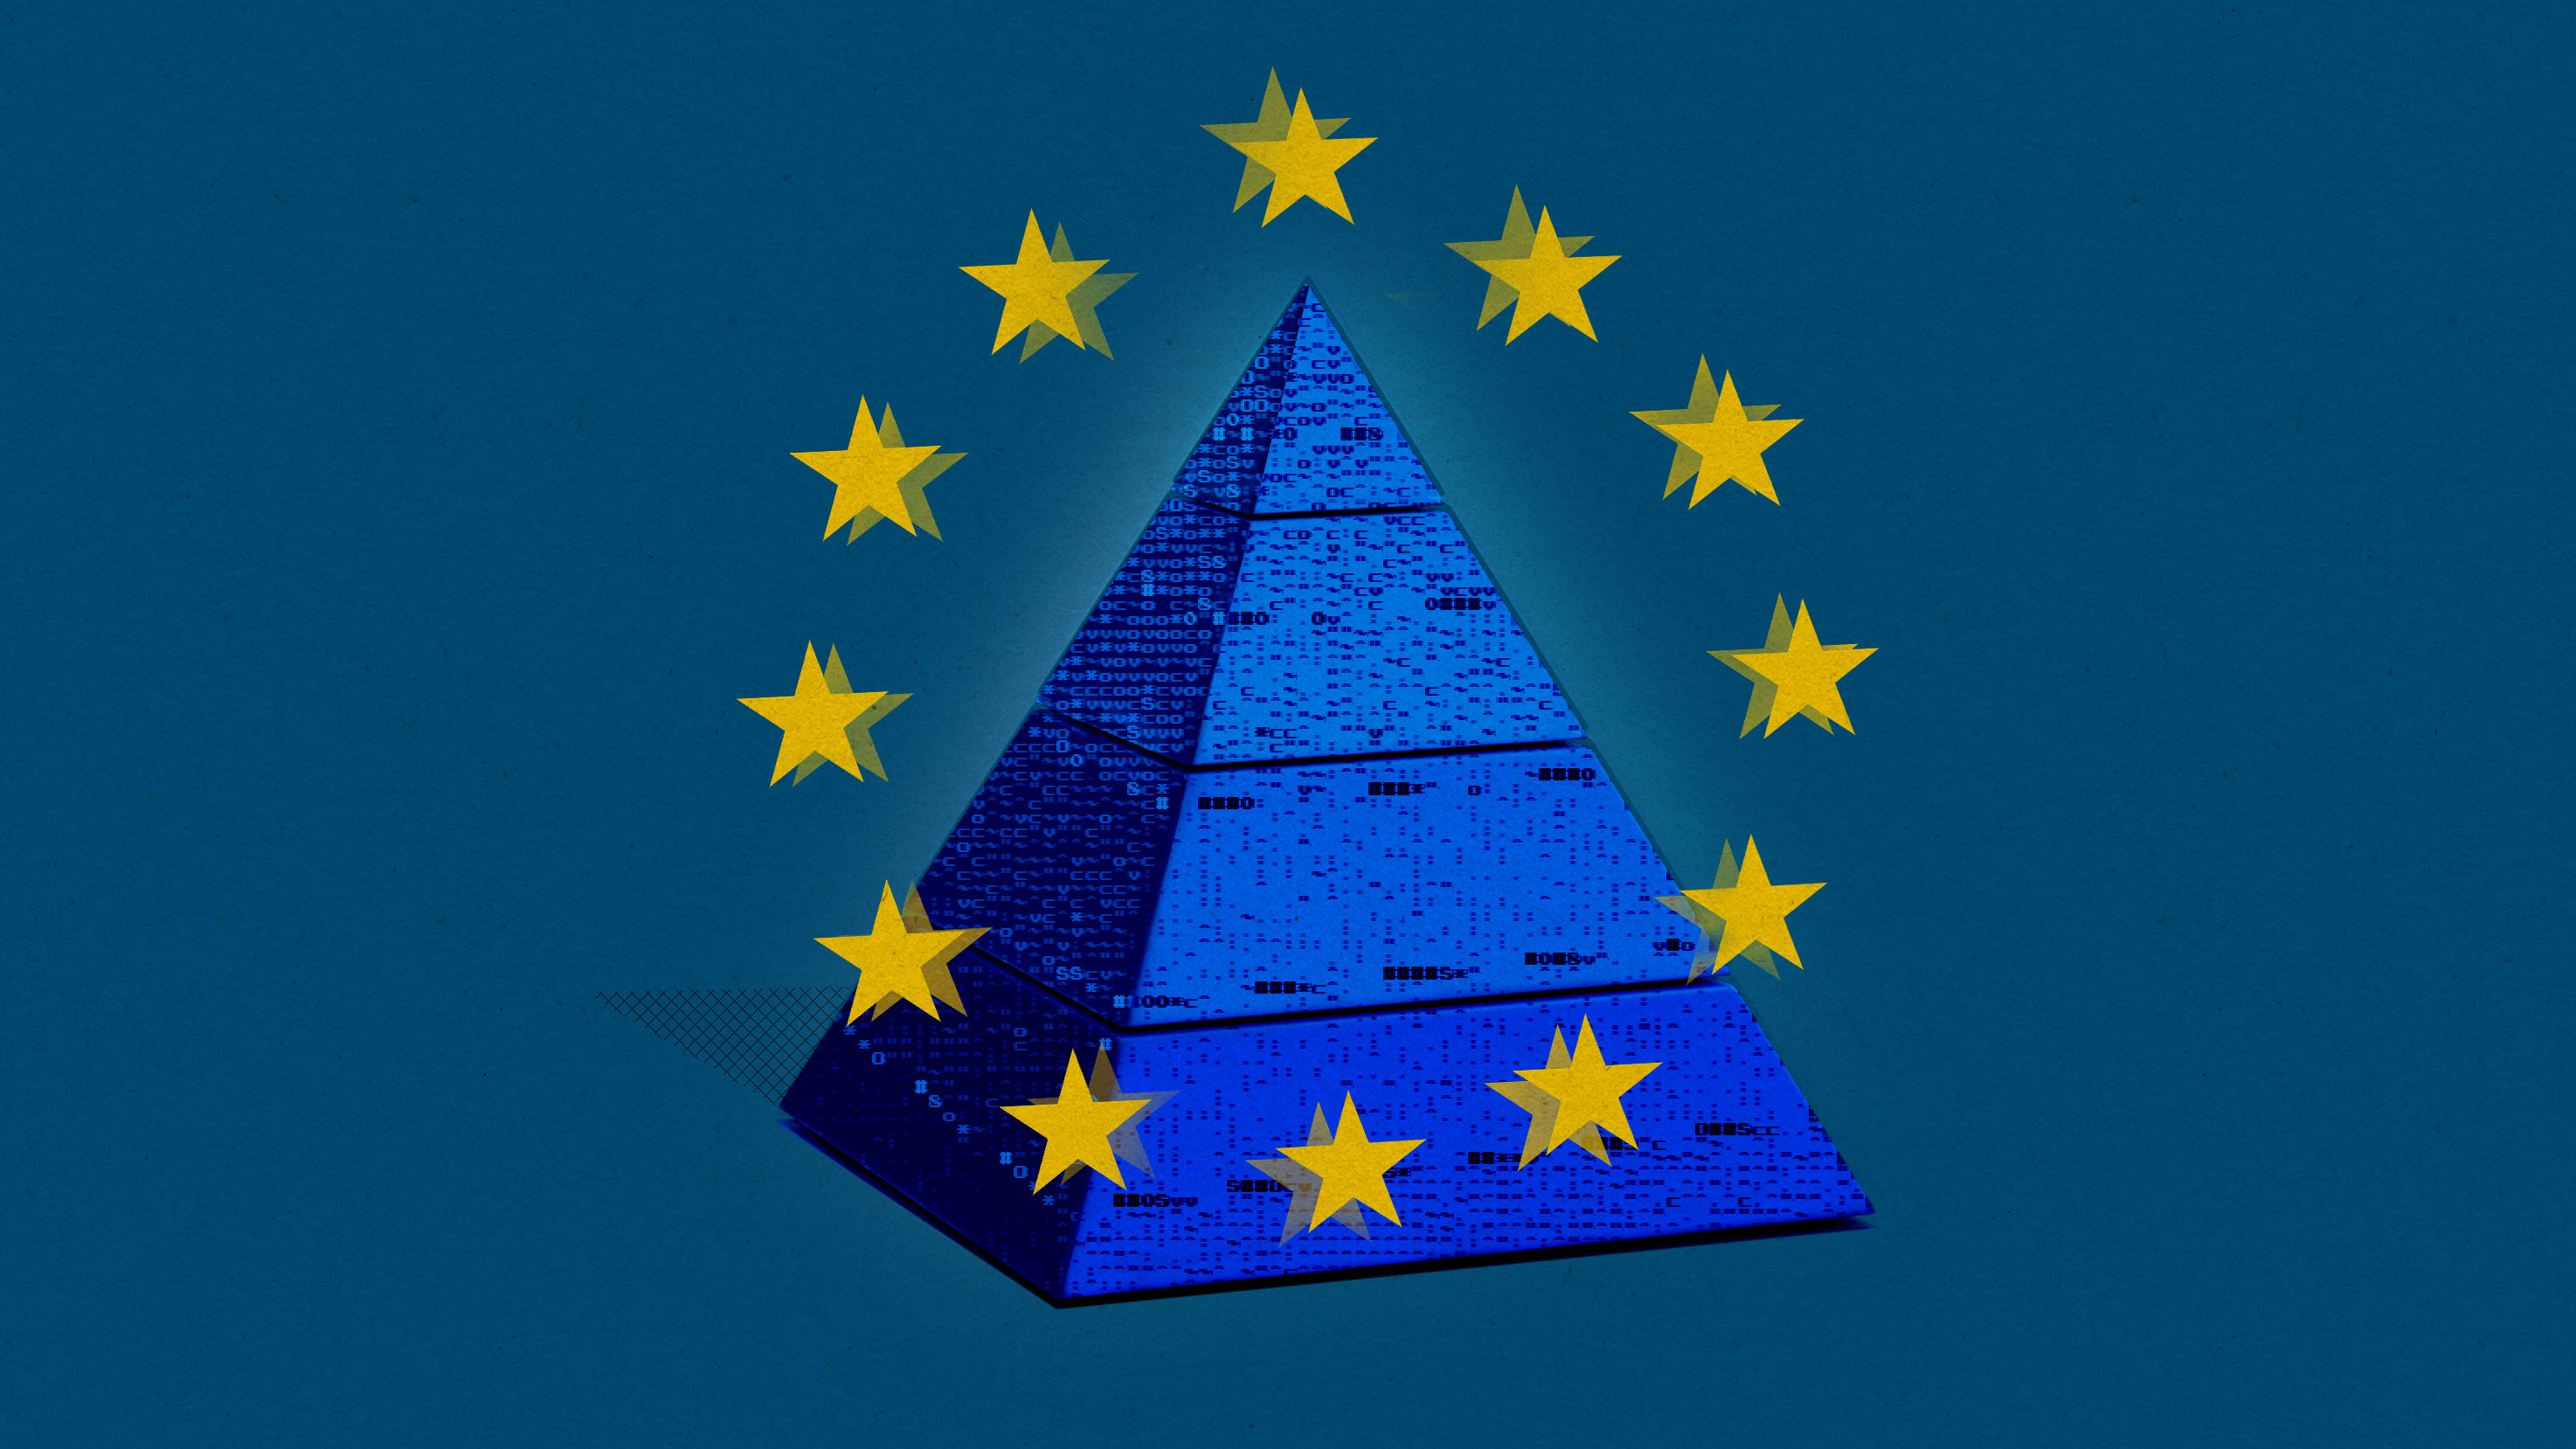 blue four-stage risk assessment pyramid with ascii characters beneath the yellow ring of stars of the European Union flag